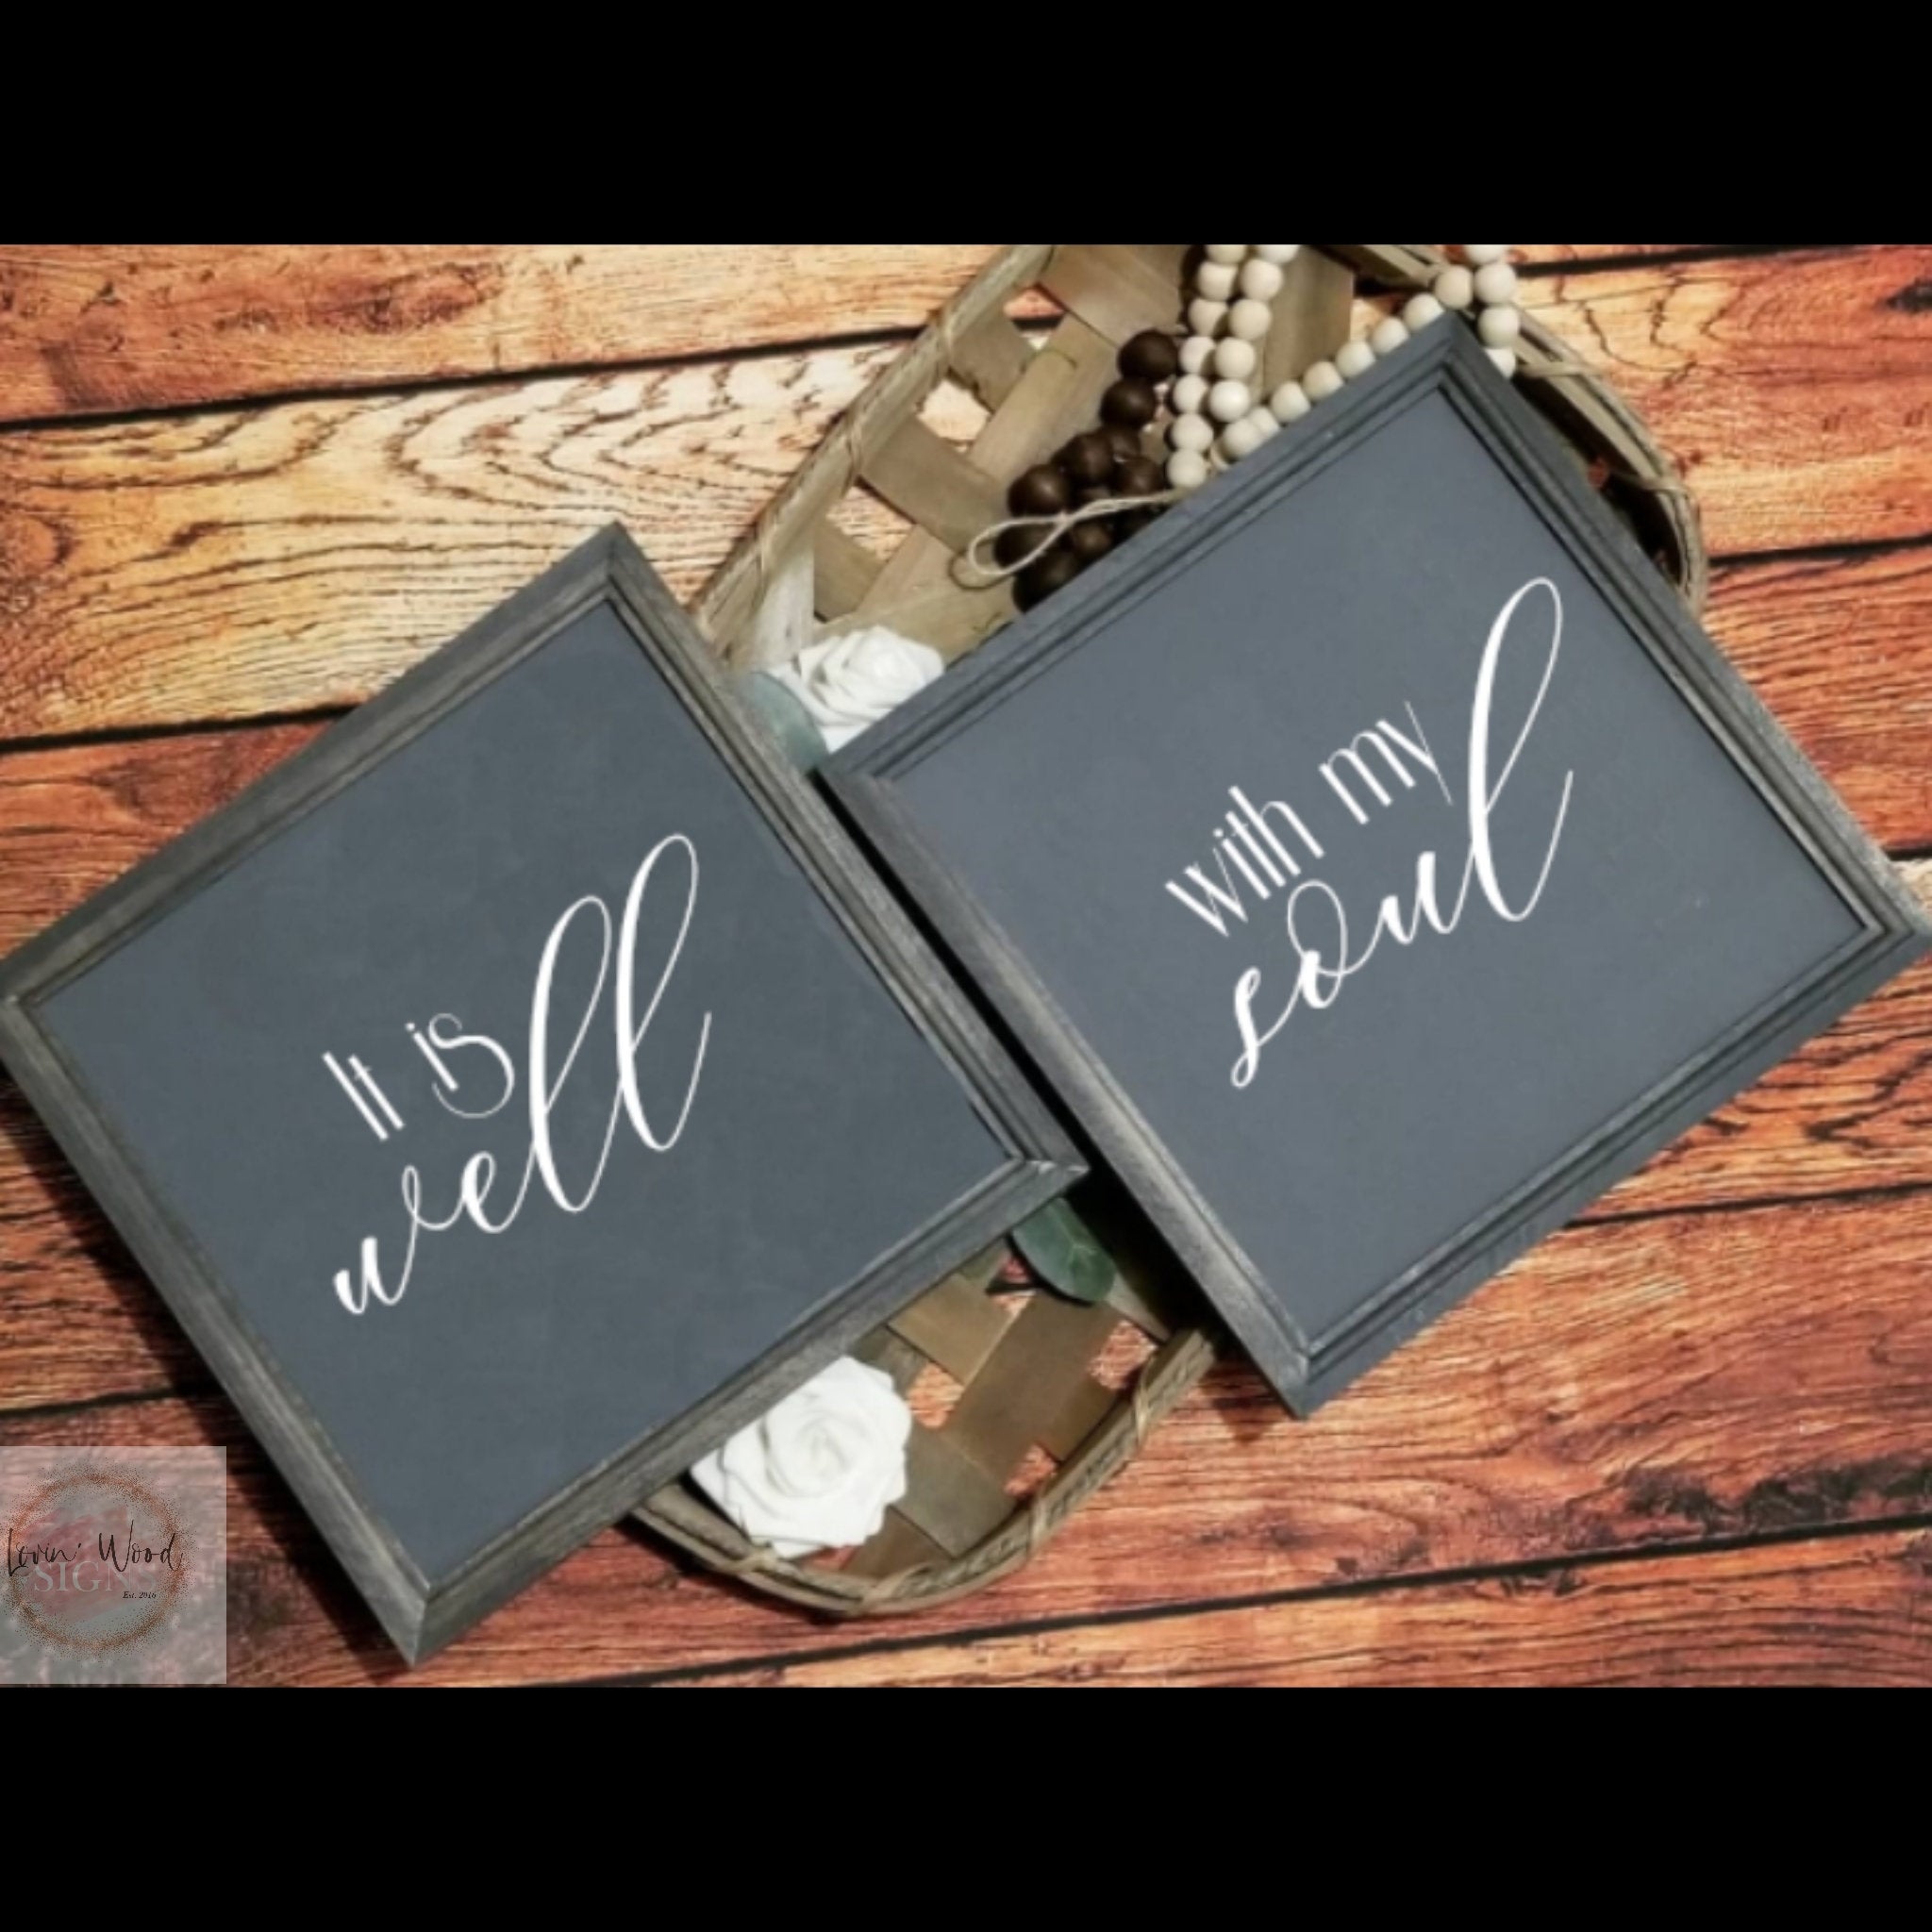 It is well with my soul, set of 2